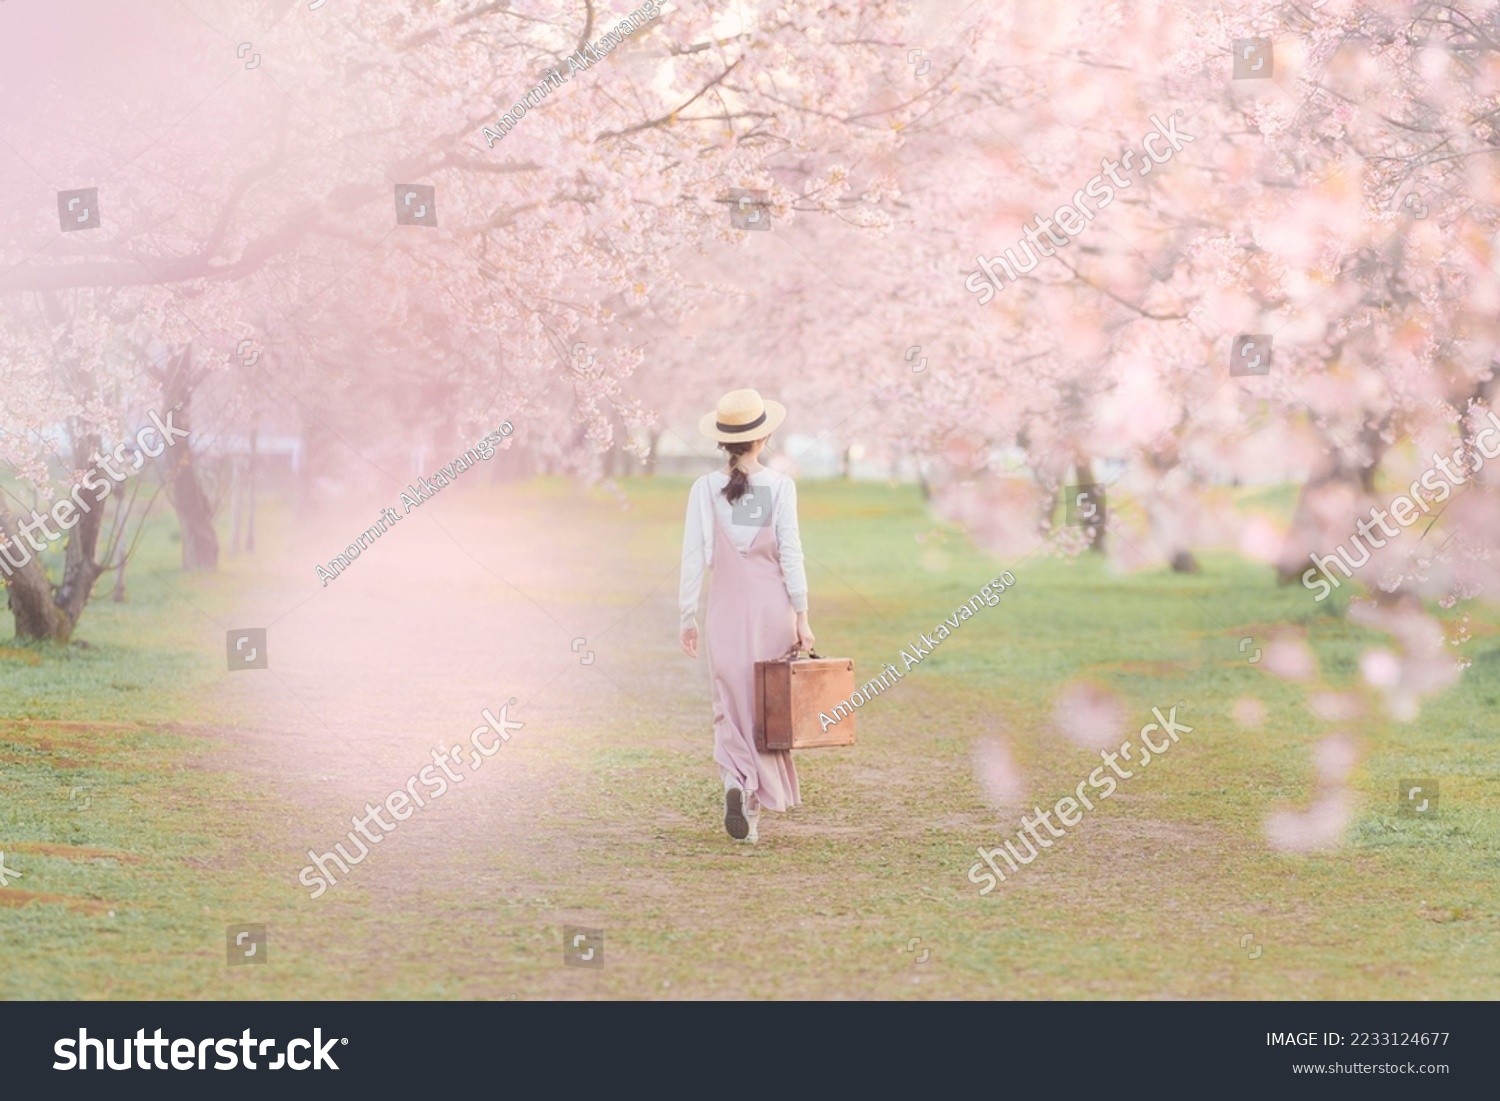 Young woman among beautiful cherry blossoms in full bloom #2233124677